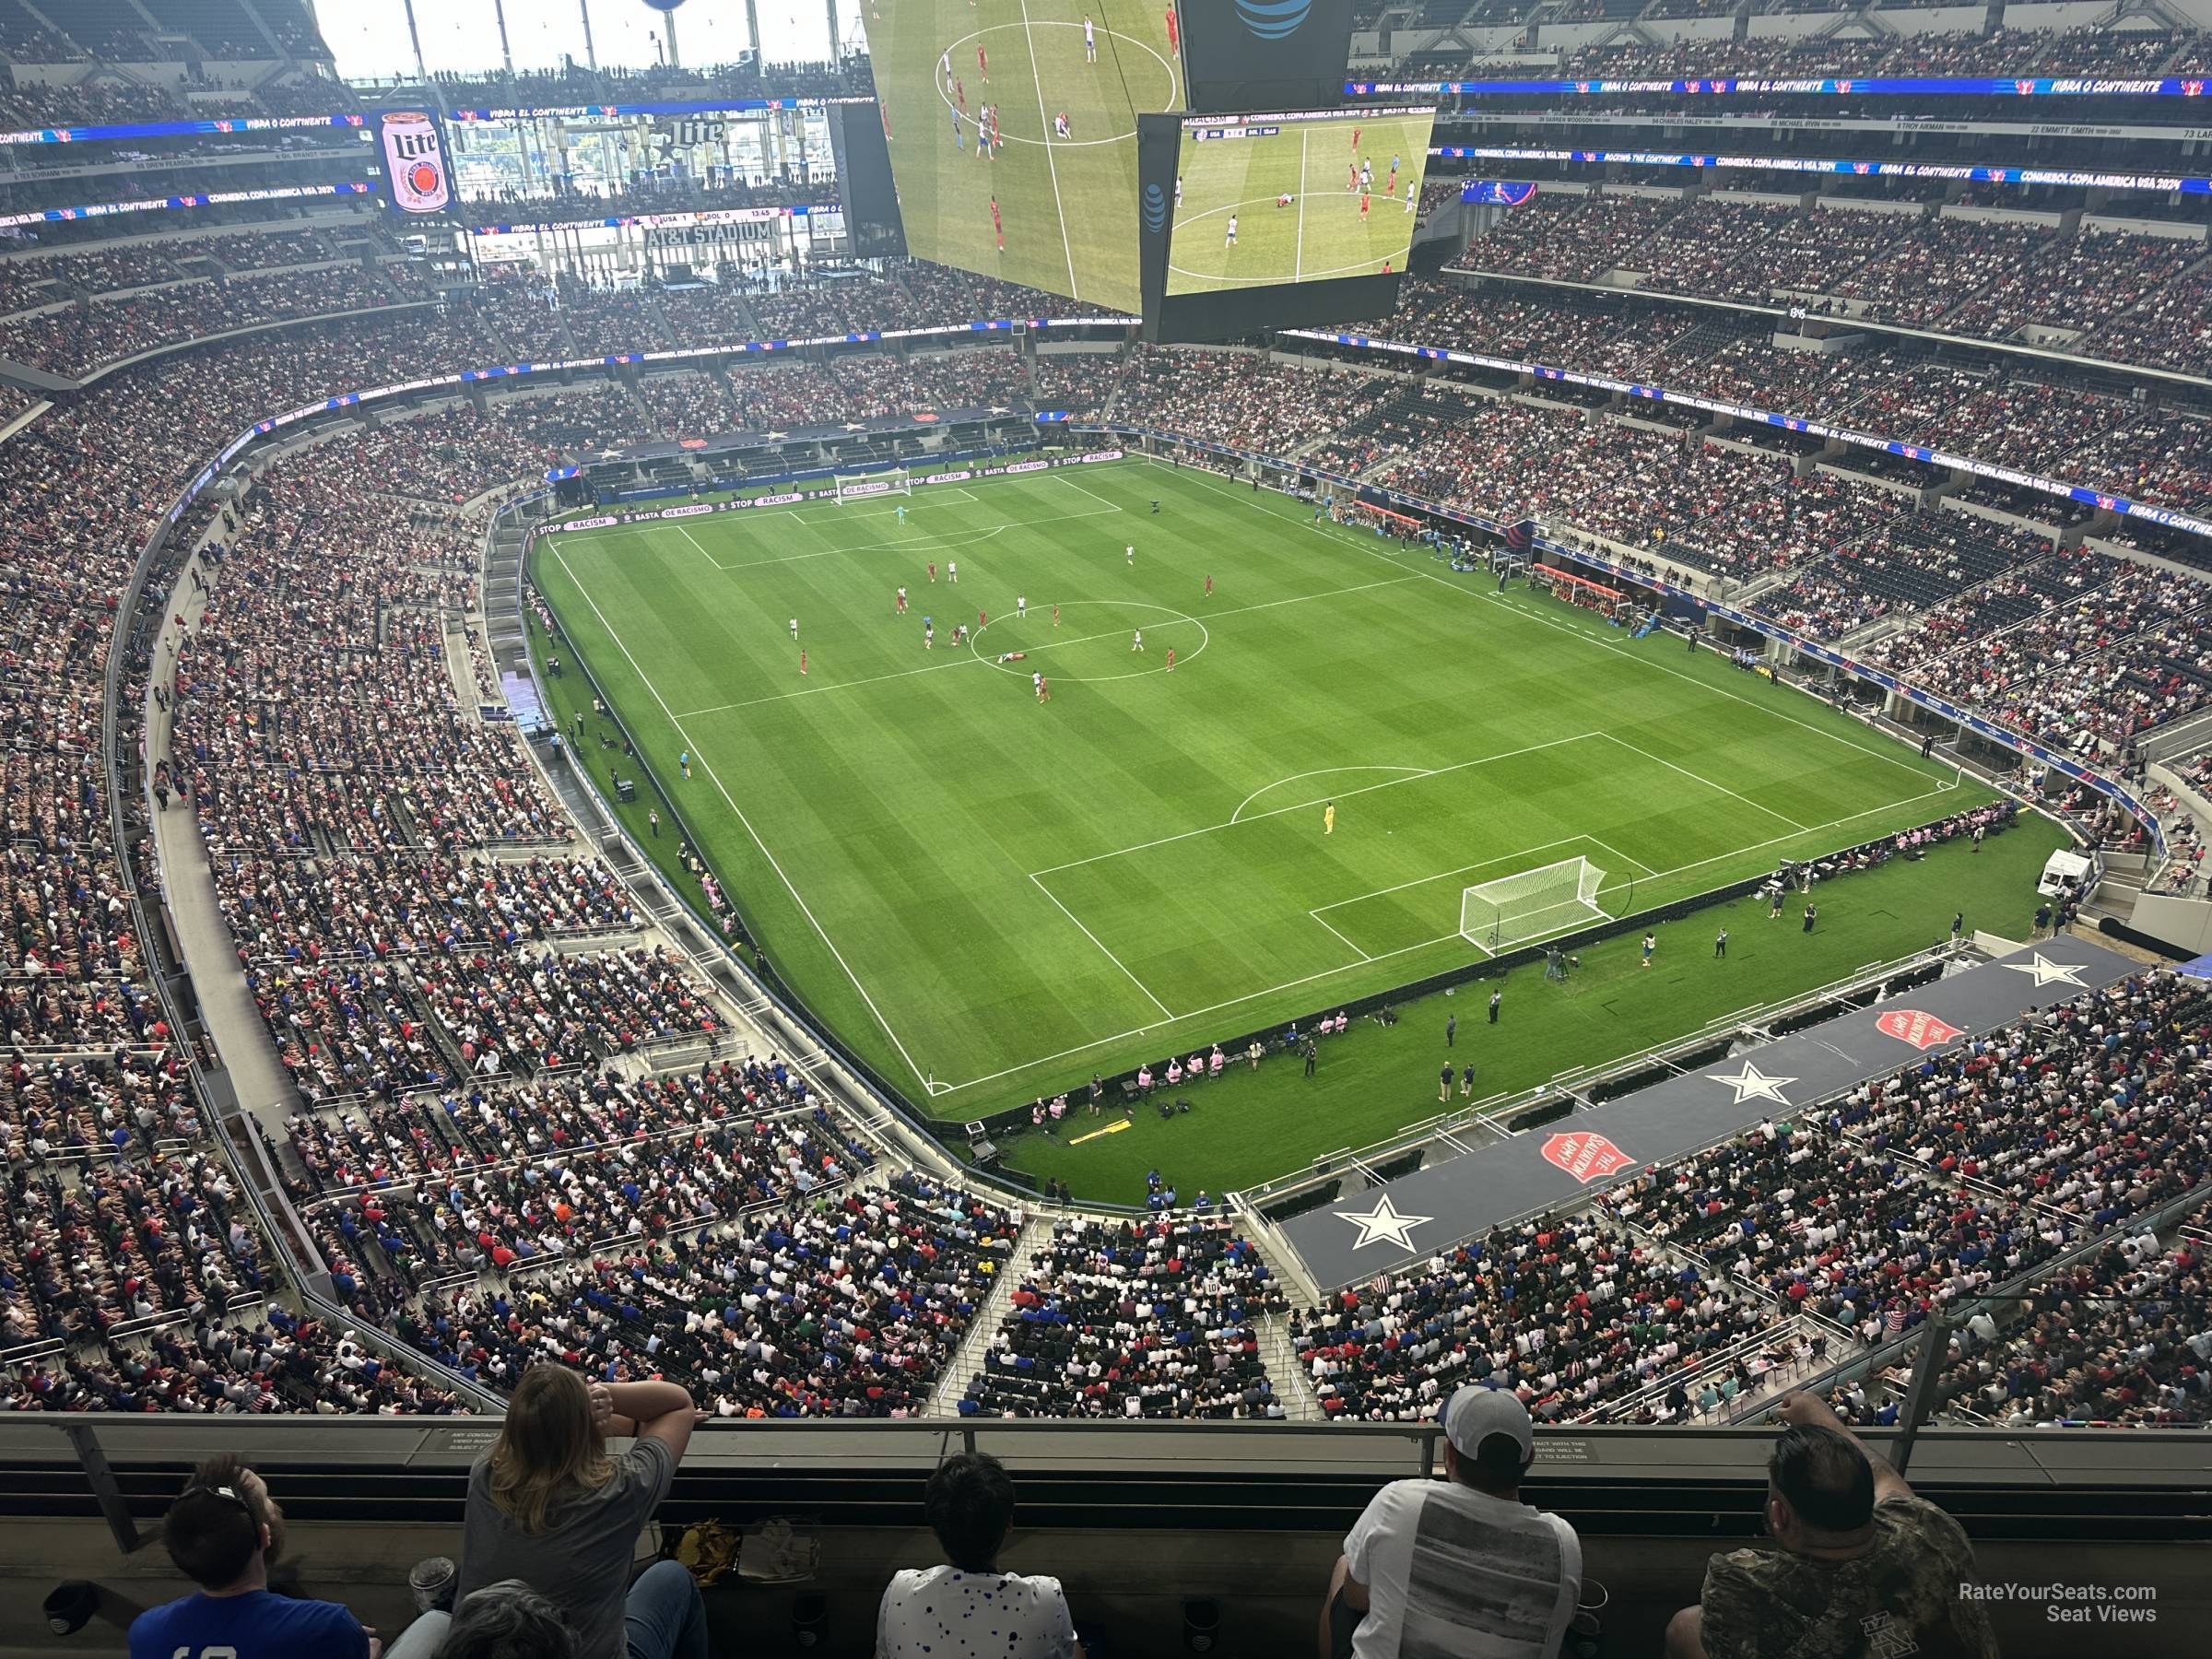 section 402, row 3 seat view  for soccer - at&t stadium (cowboys stadium)